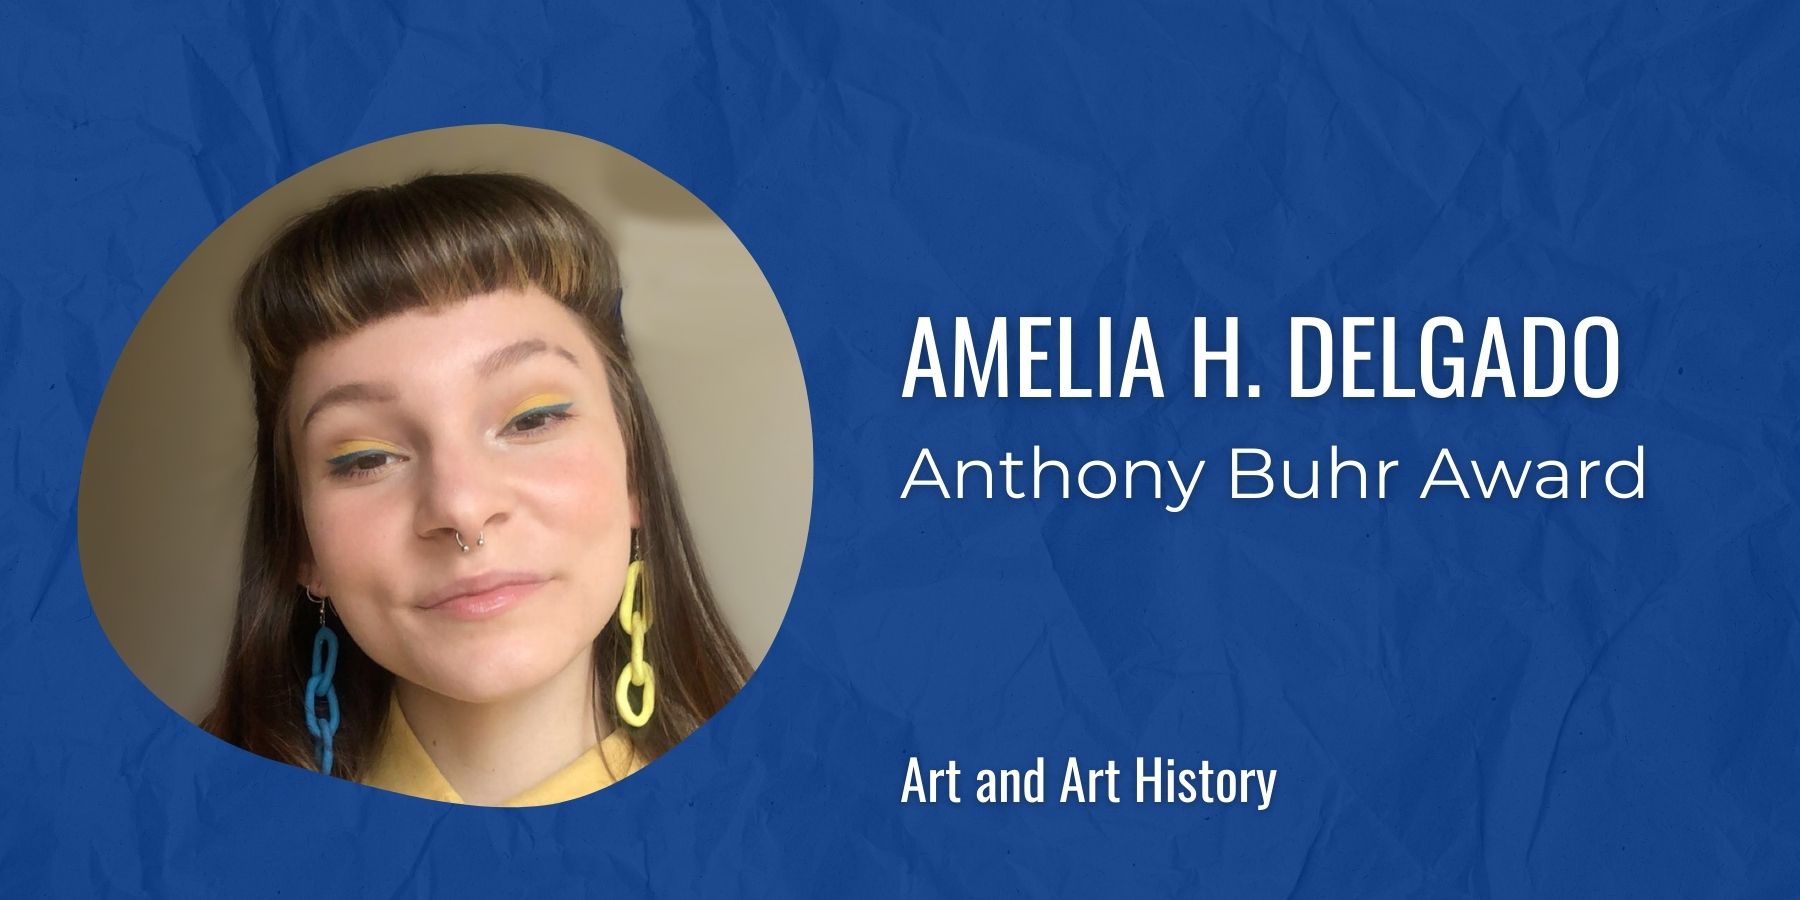 Image of Amelia Delgado and text: Anthony Buhr Award, Art and Art History
